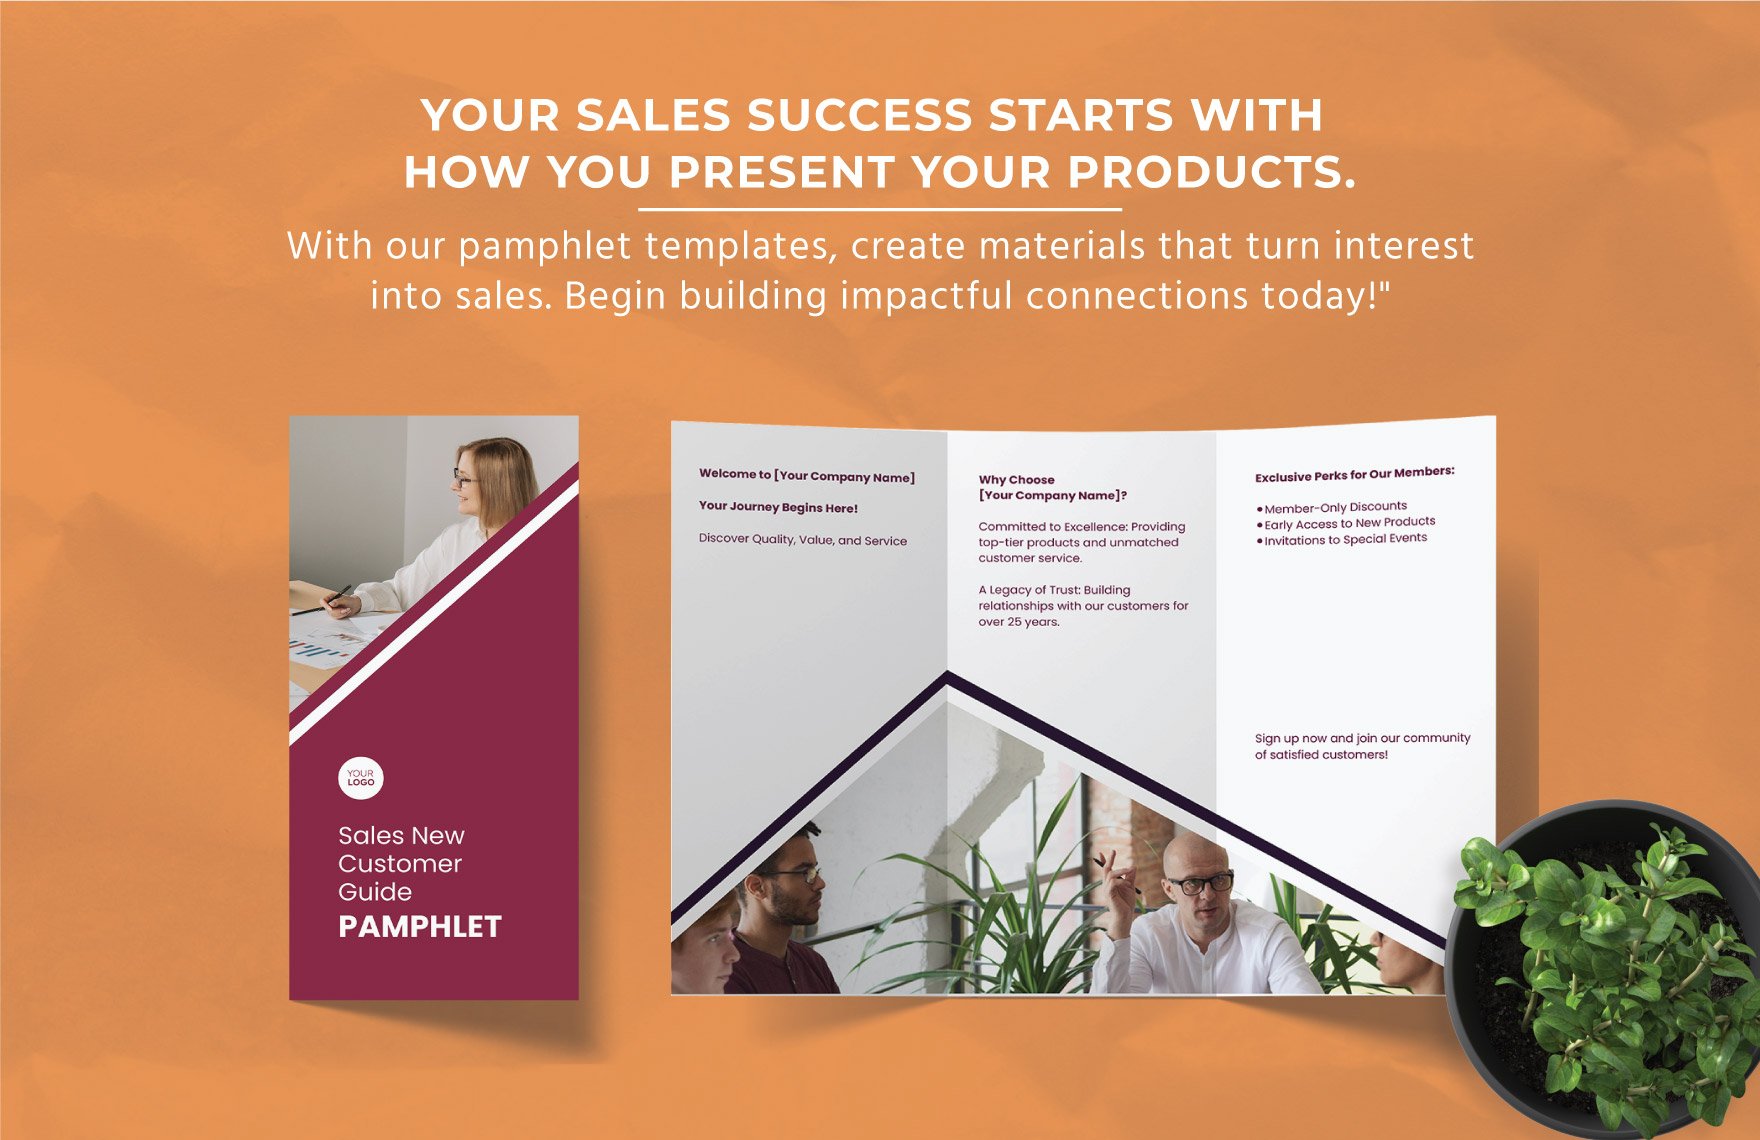 Sales New Customer Guide Pamphlet Template